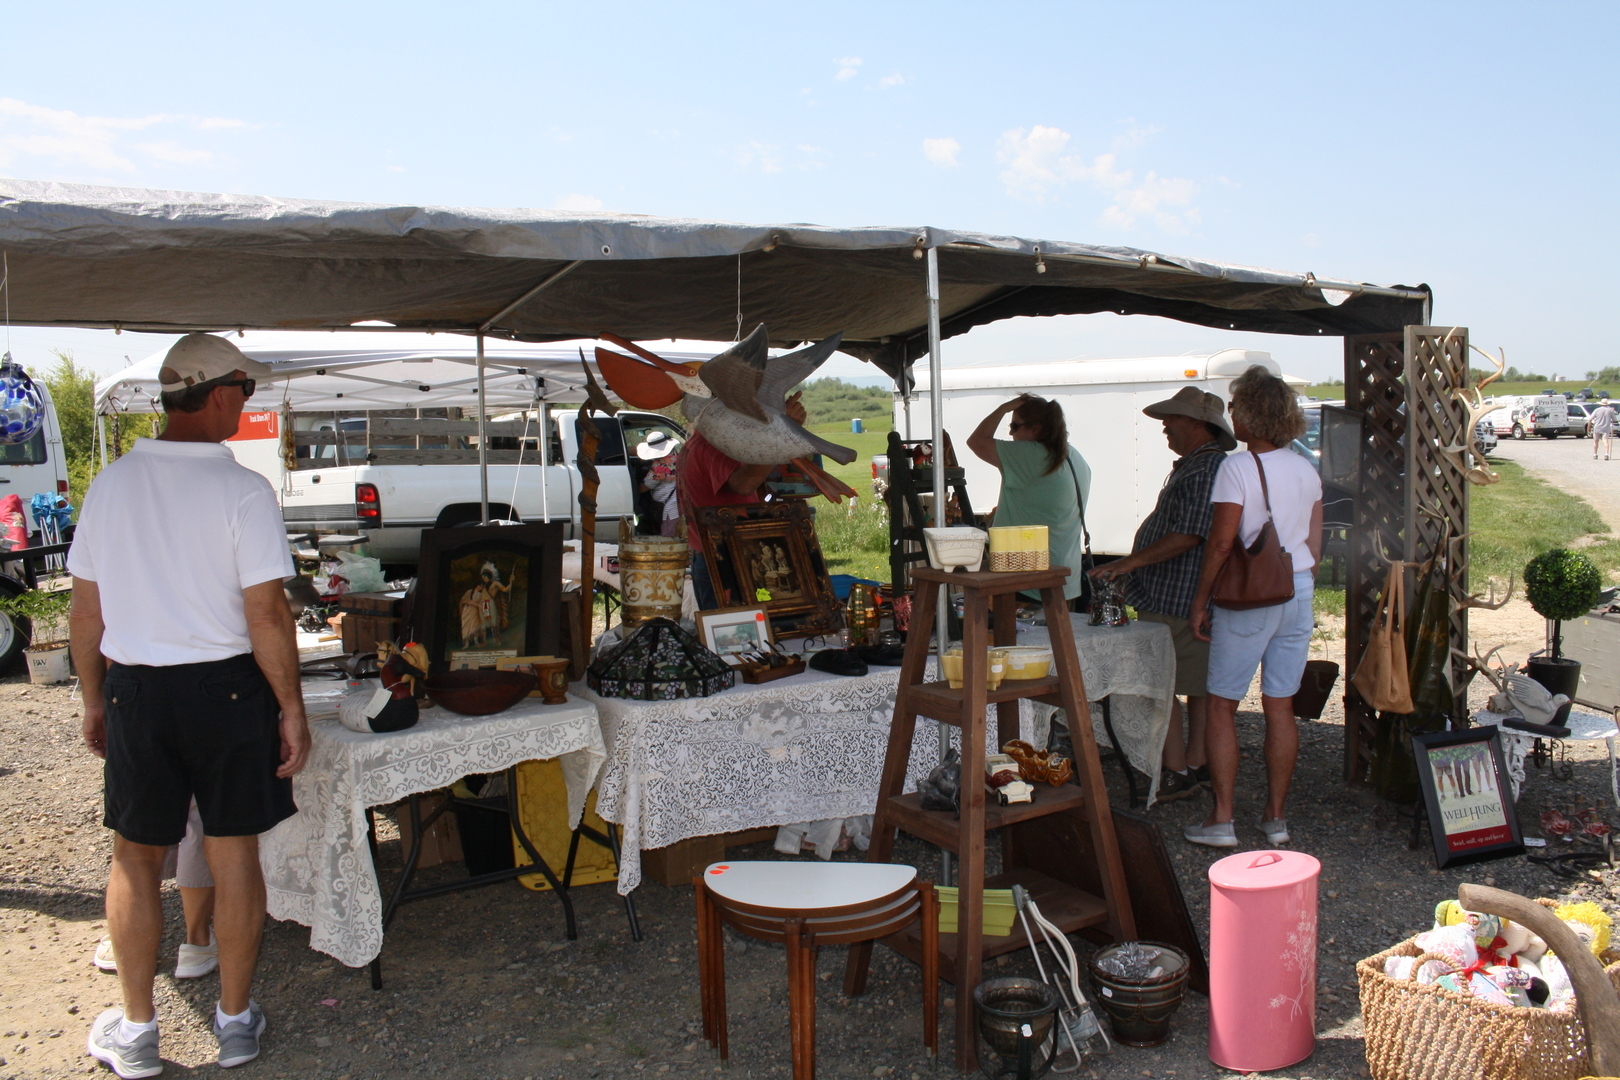 69th Fishersville Antiques Expo, Fishersville, Virginia, United States